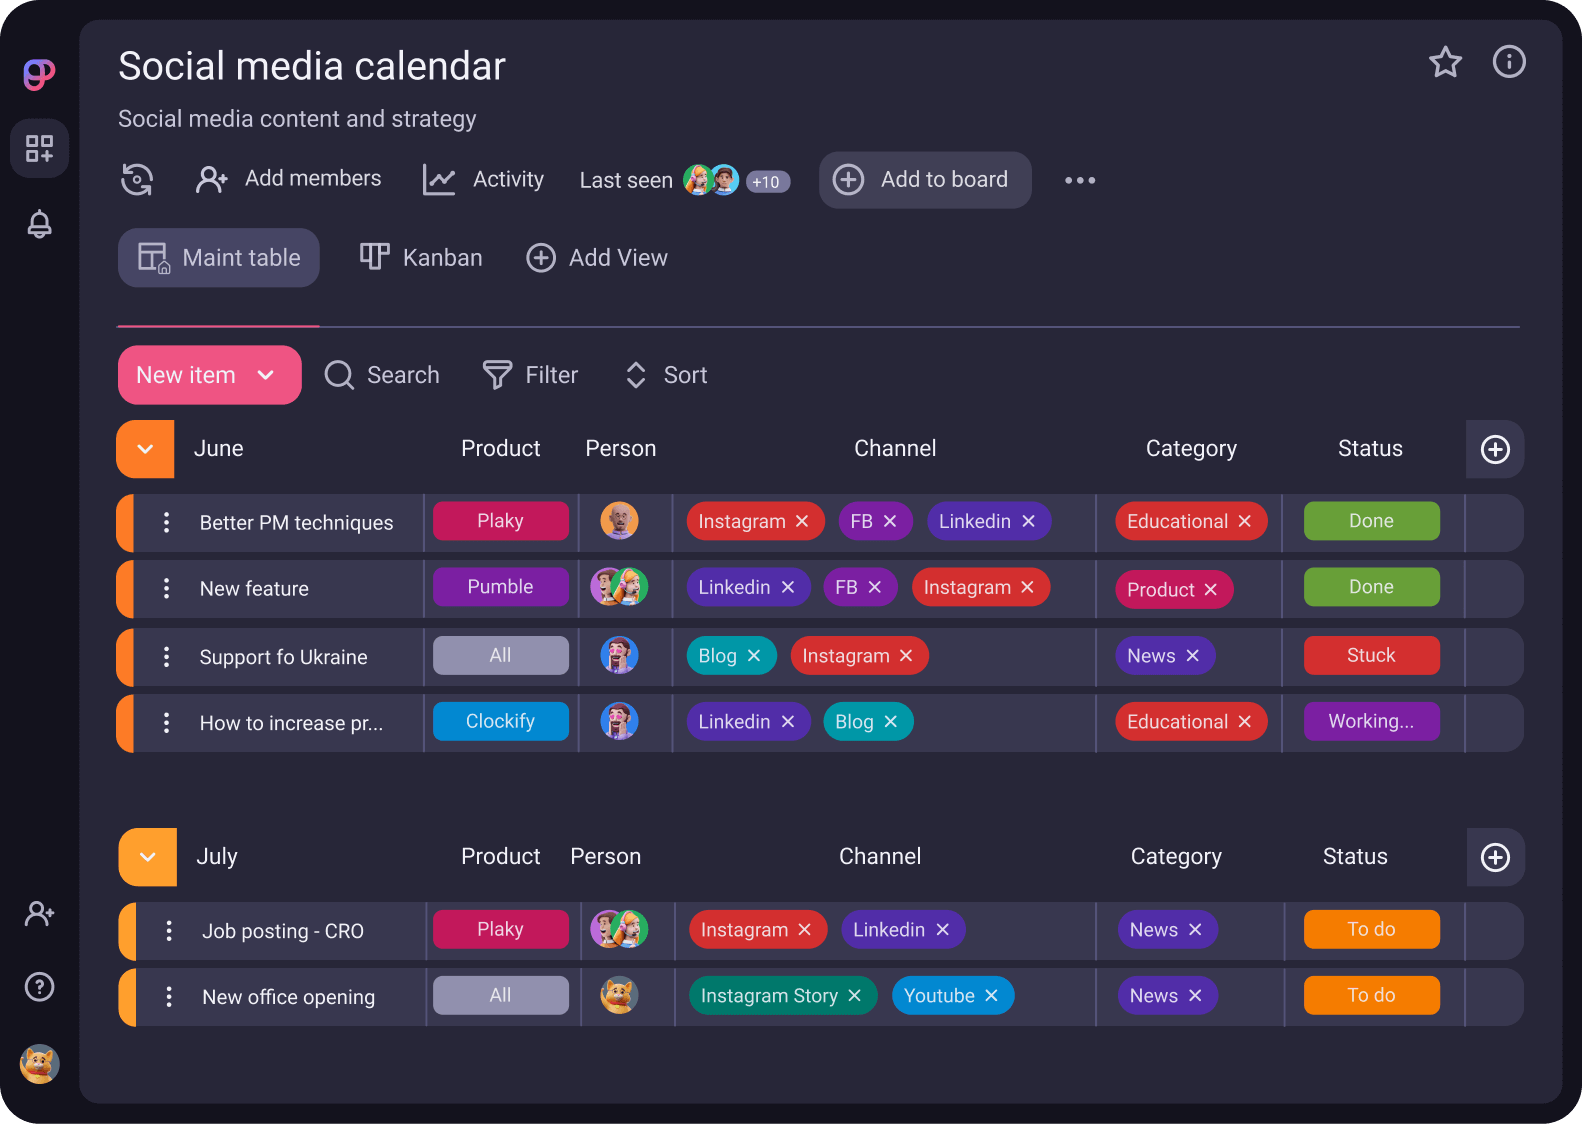 Social media calendar template in Plaky project management tool